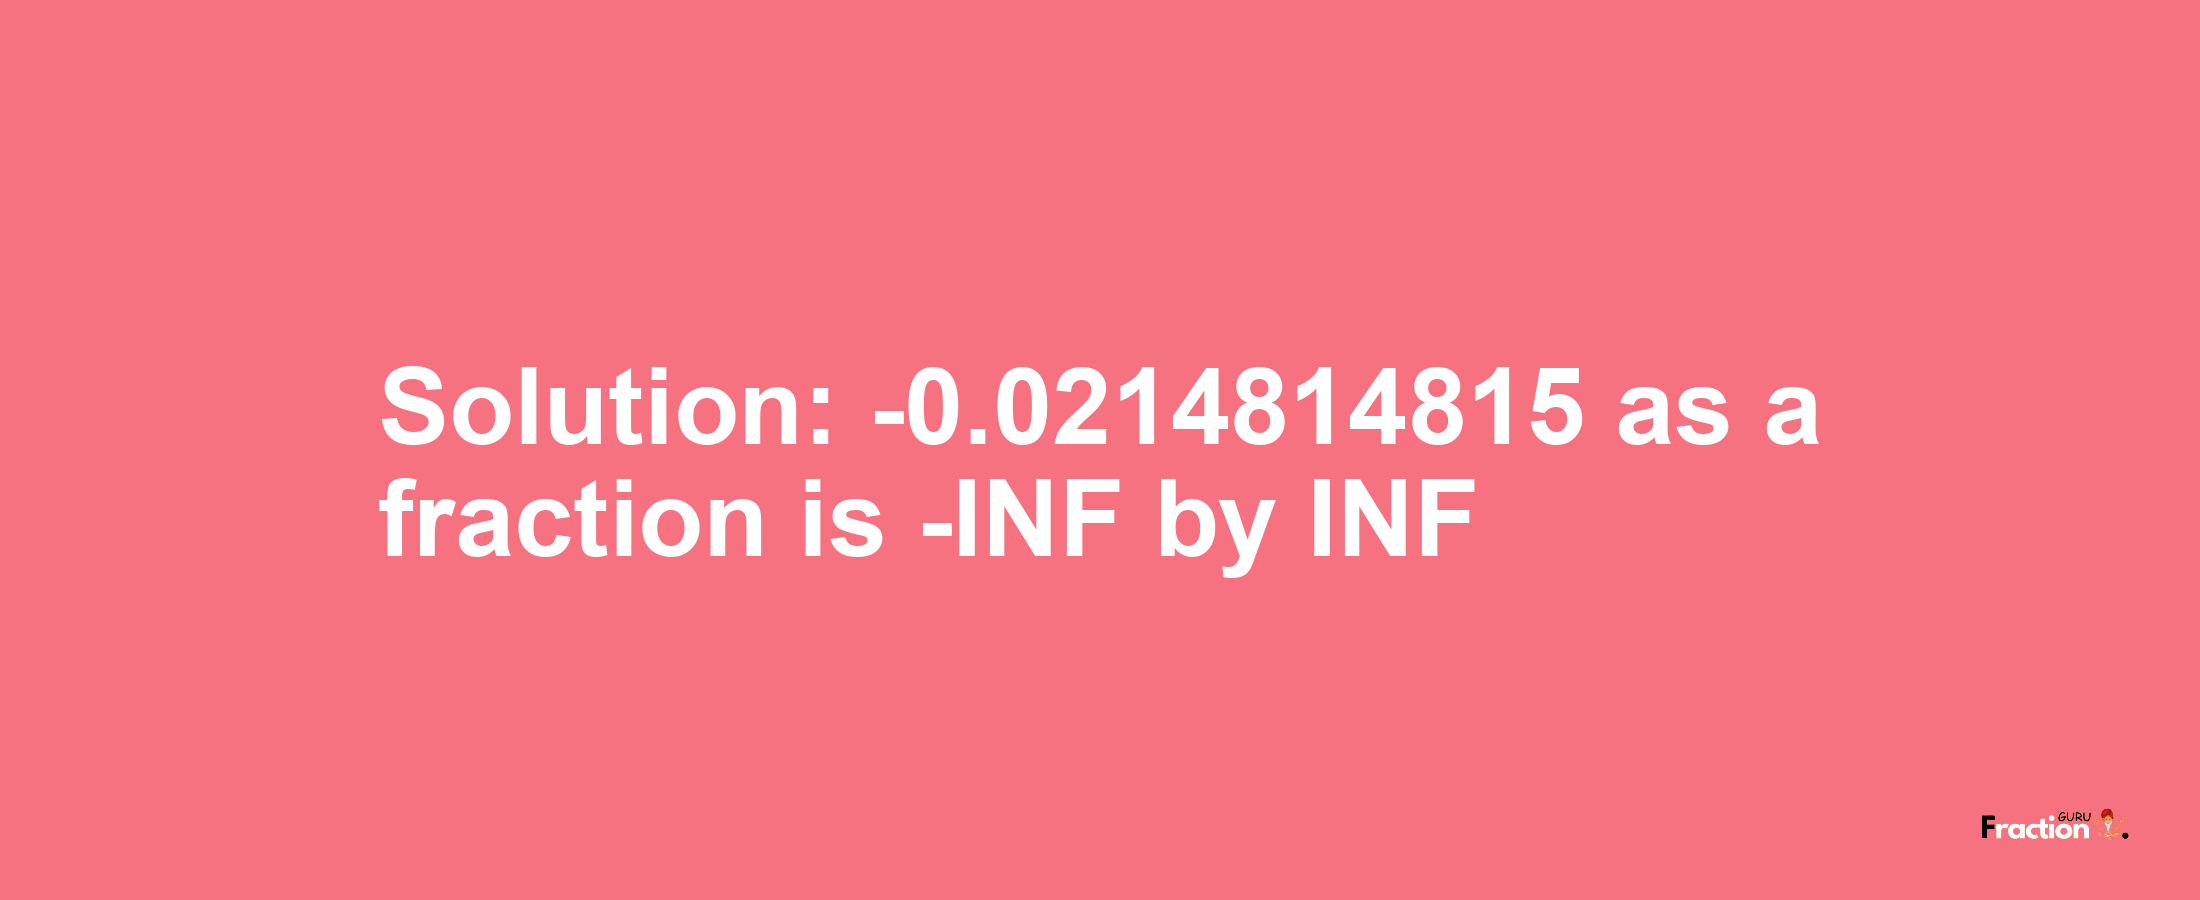 Solution:-0.0214814815 as a fraction is -INF/INF